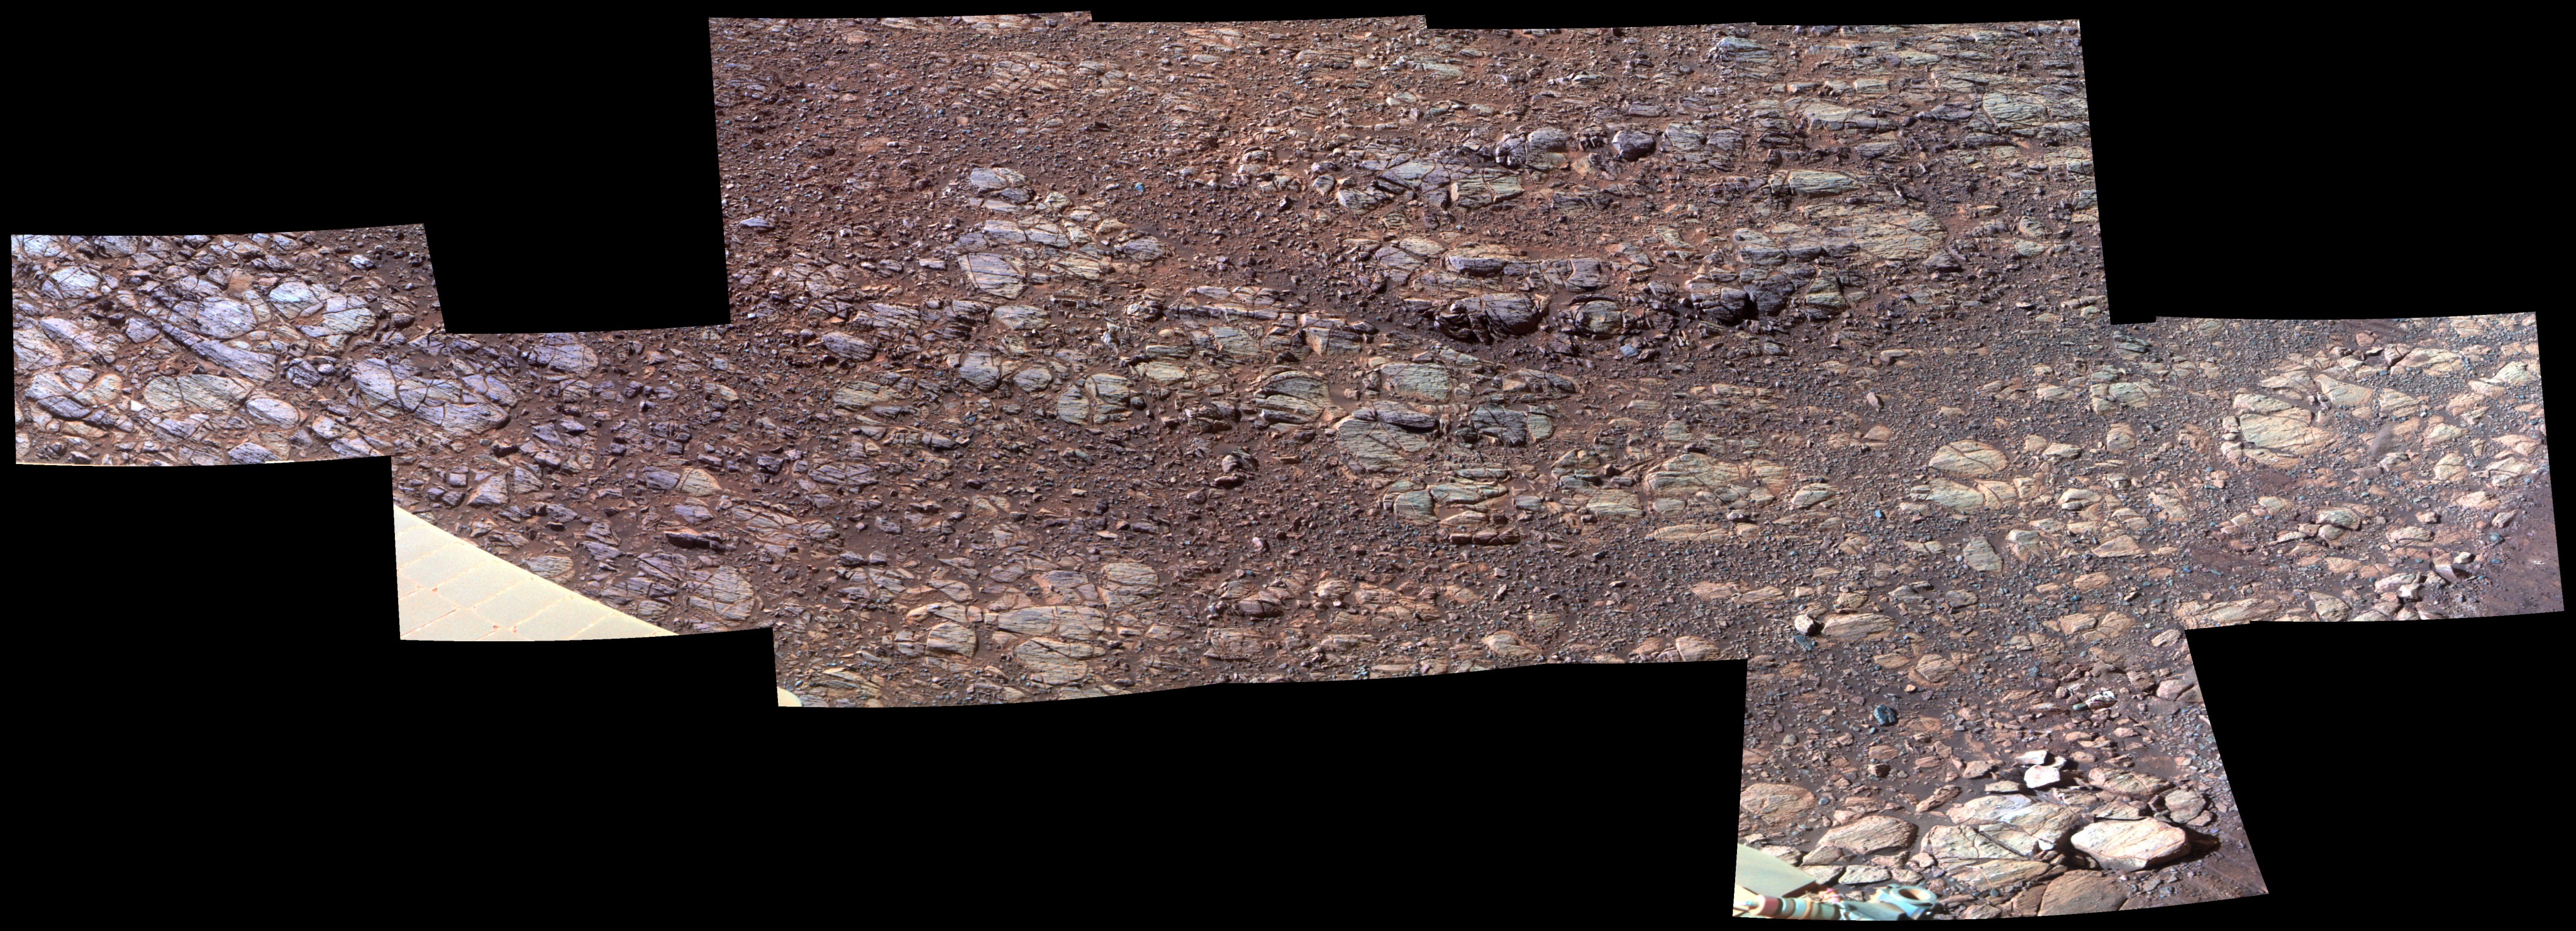 Wind's Marks in "Perseverance Valley" (Enhanced Color)